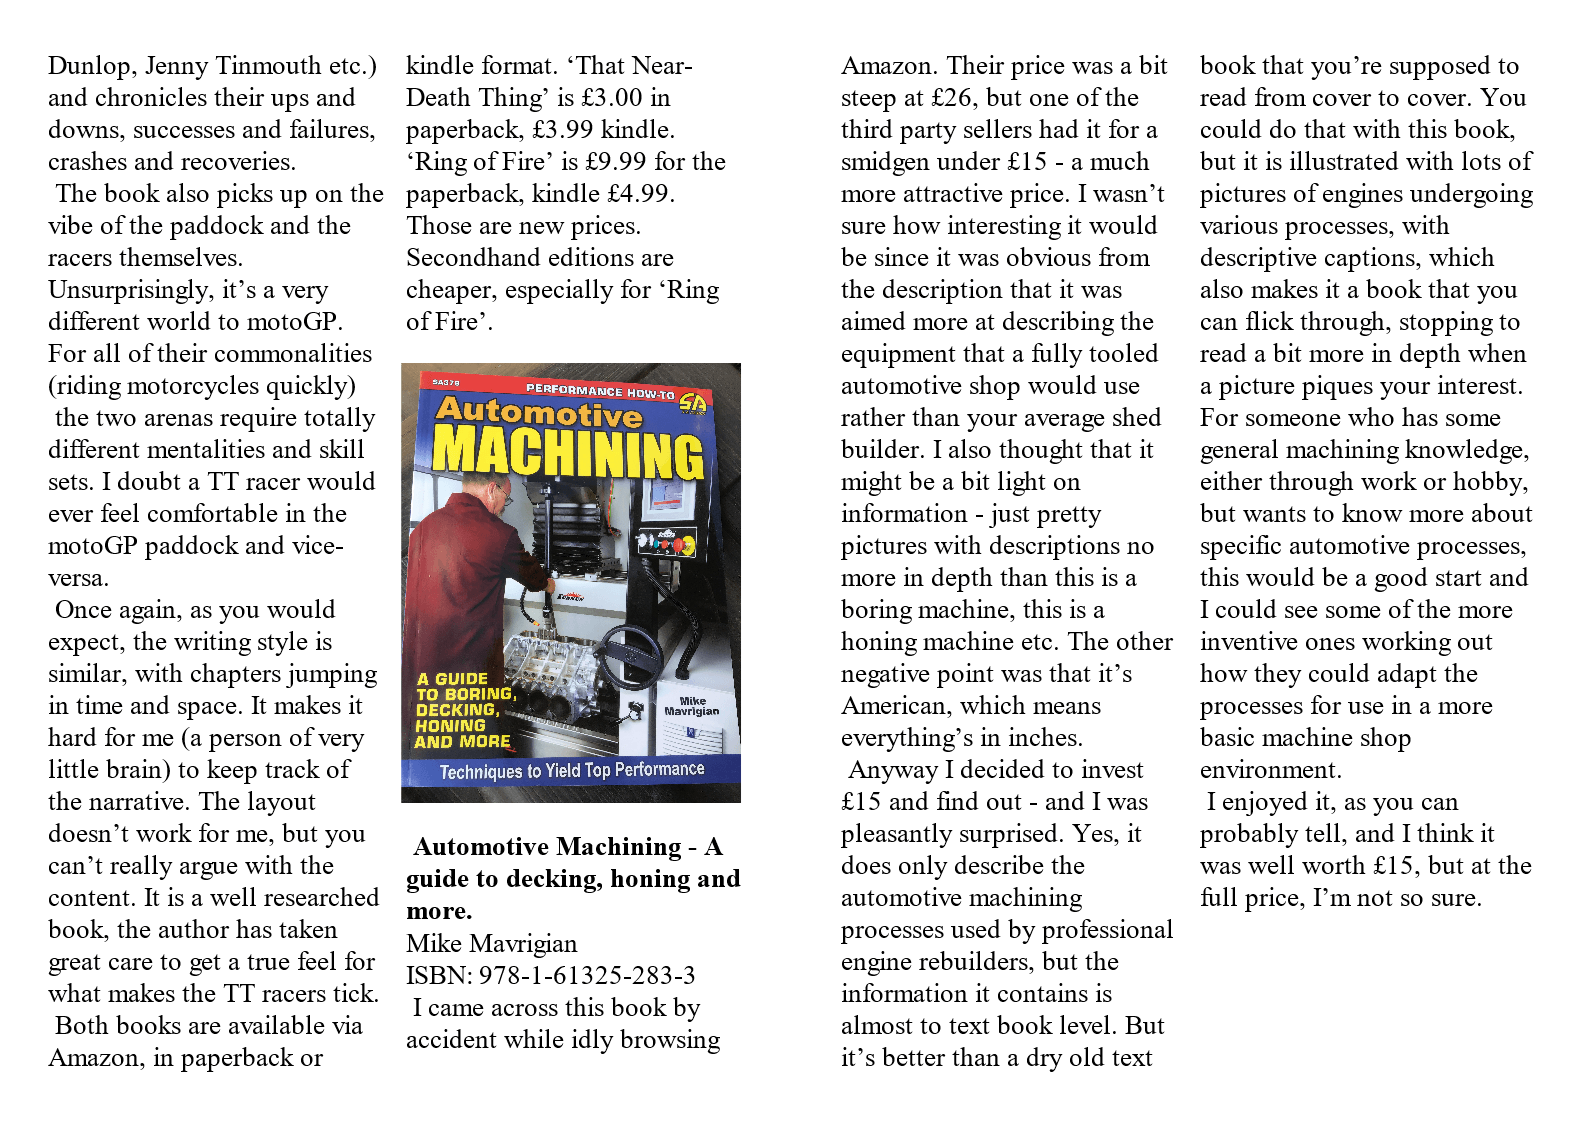 Book Review - Automotive Machining